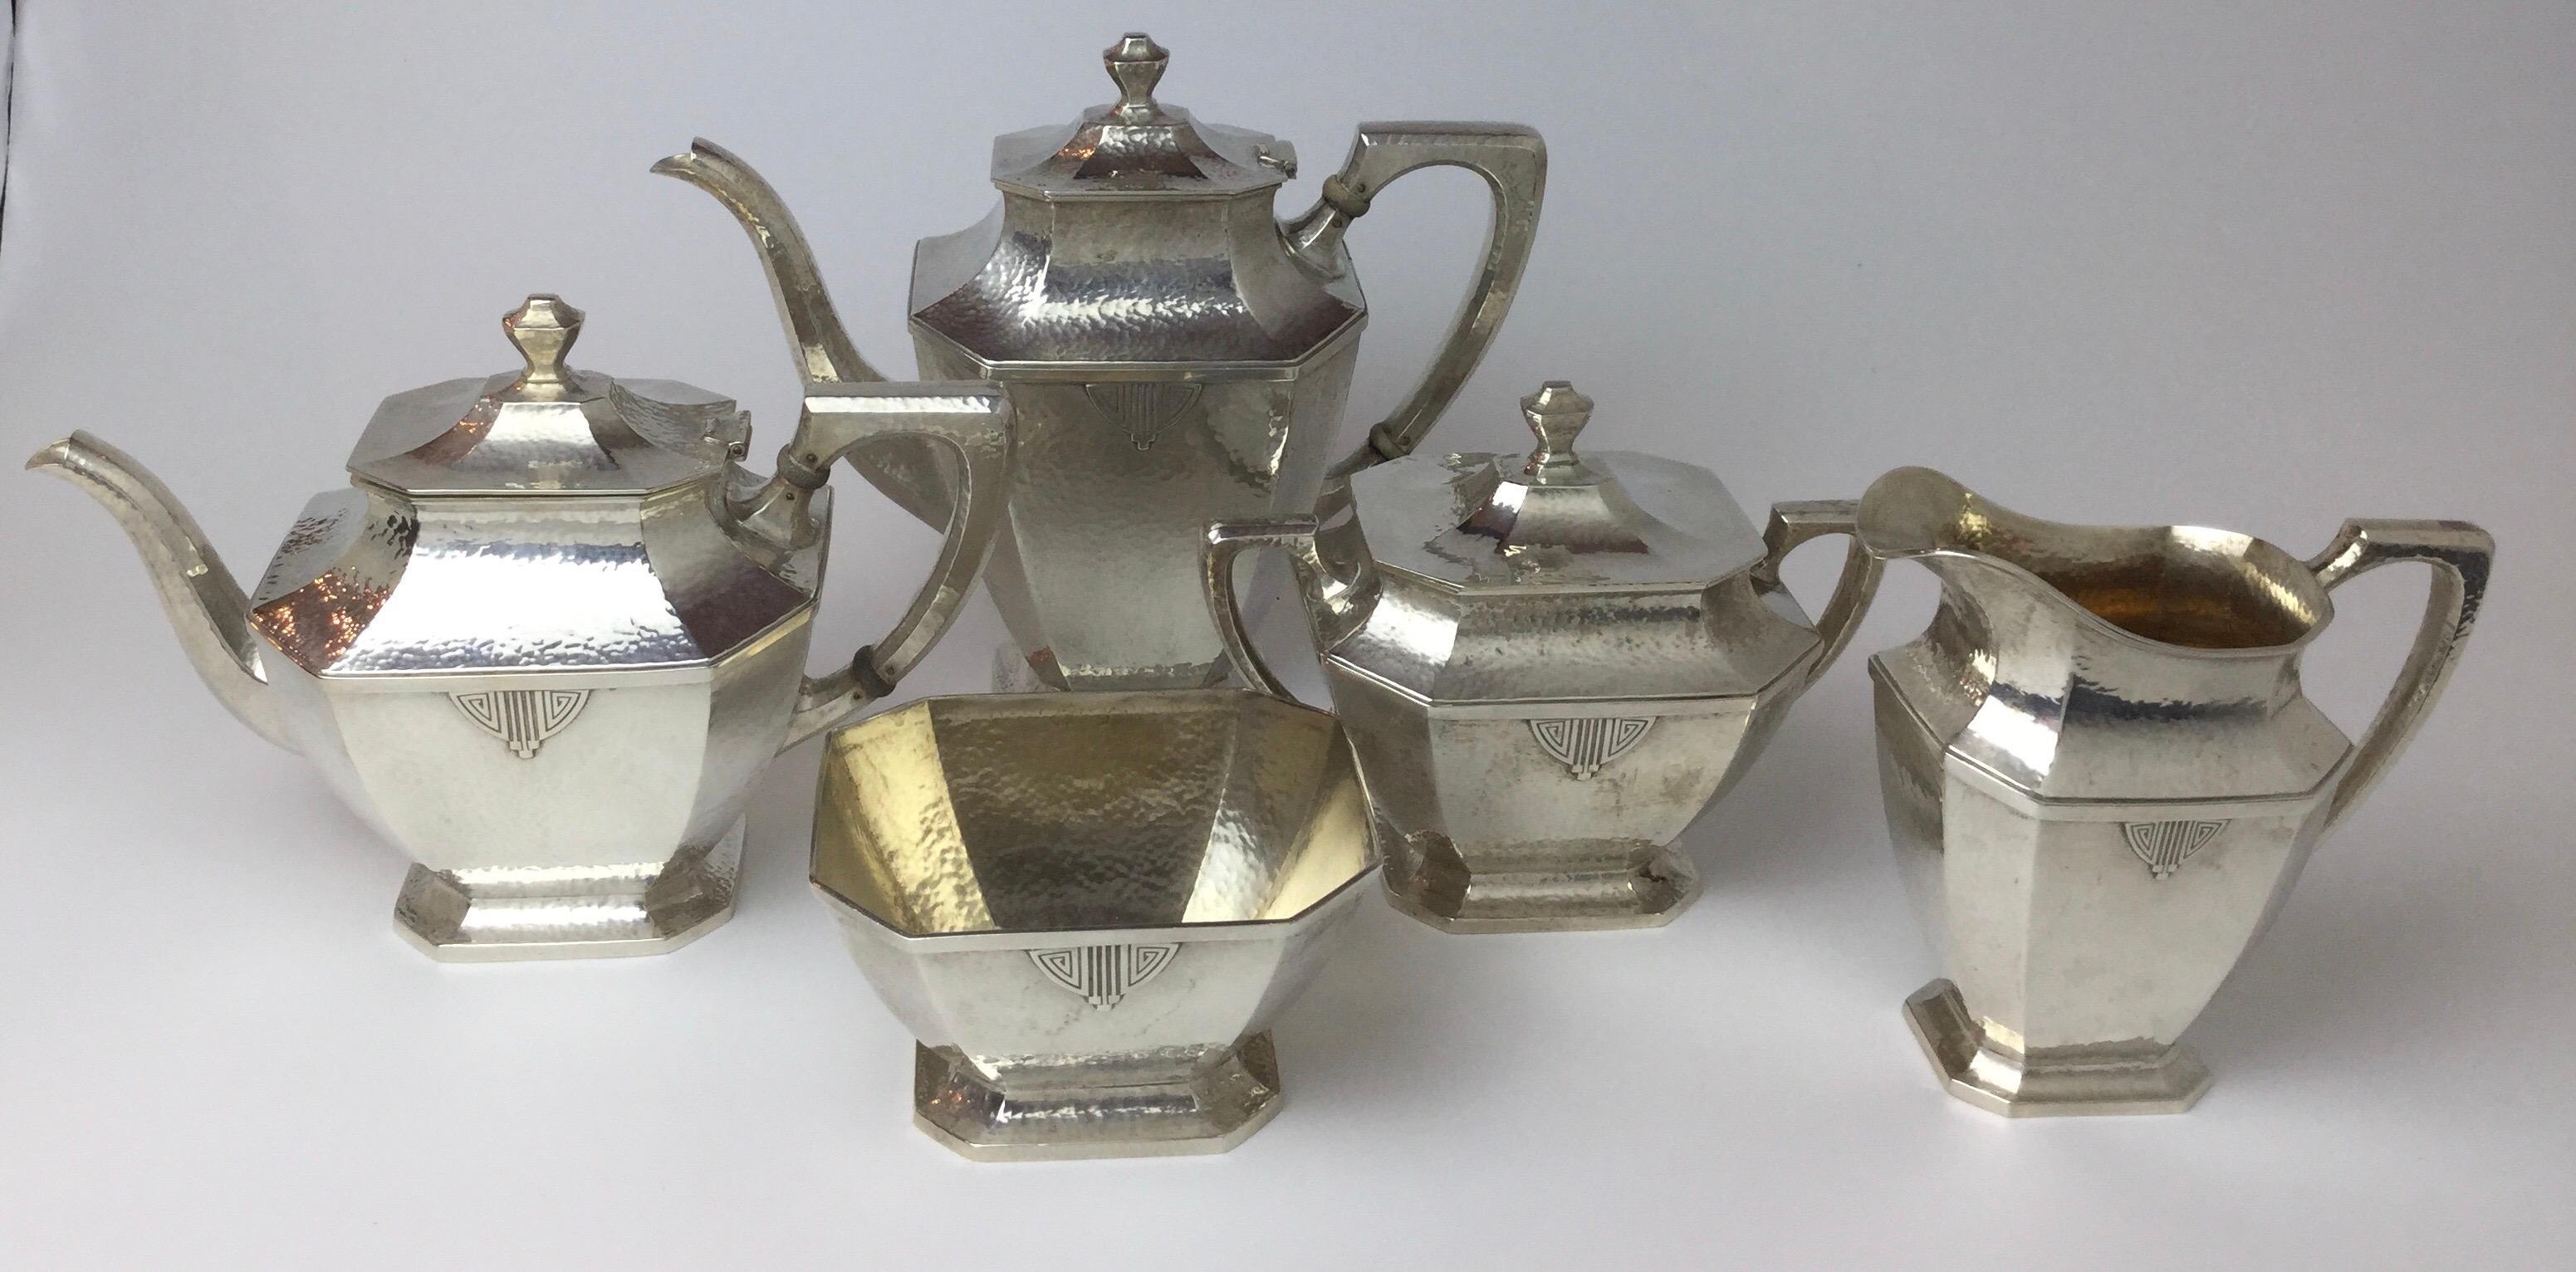 An exceptional early 20th century solid sterling silver tea service with lightly hand hammered surface. The set is from circa 1905 complete with a coffee pot, tea pot, covered sugar, creamer and waste bowl. All pieces with 8 sides with a small